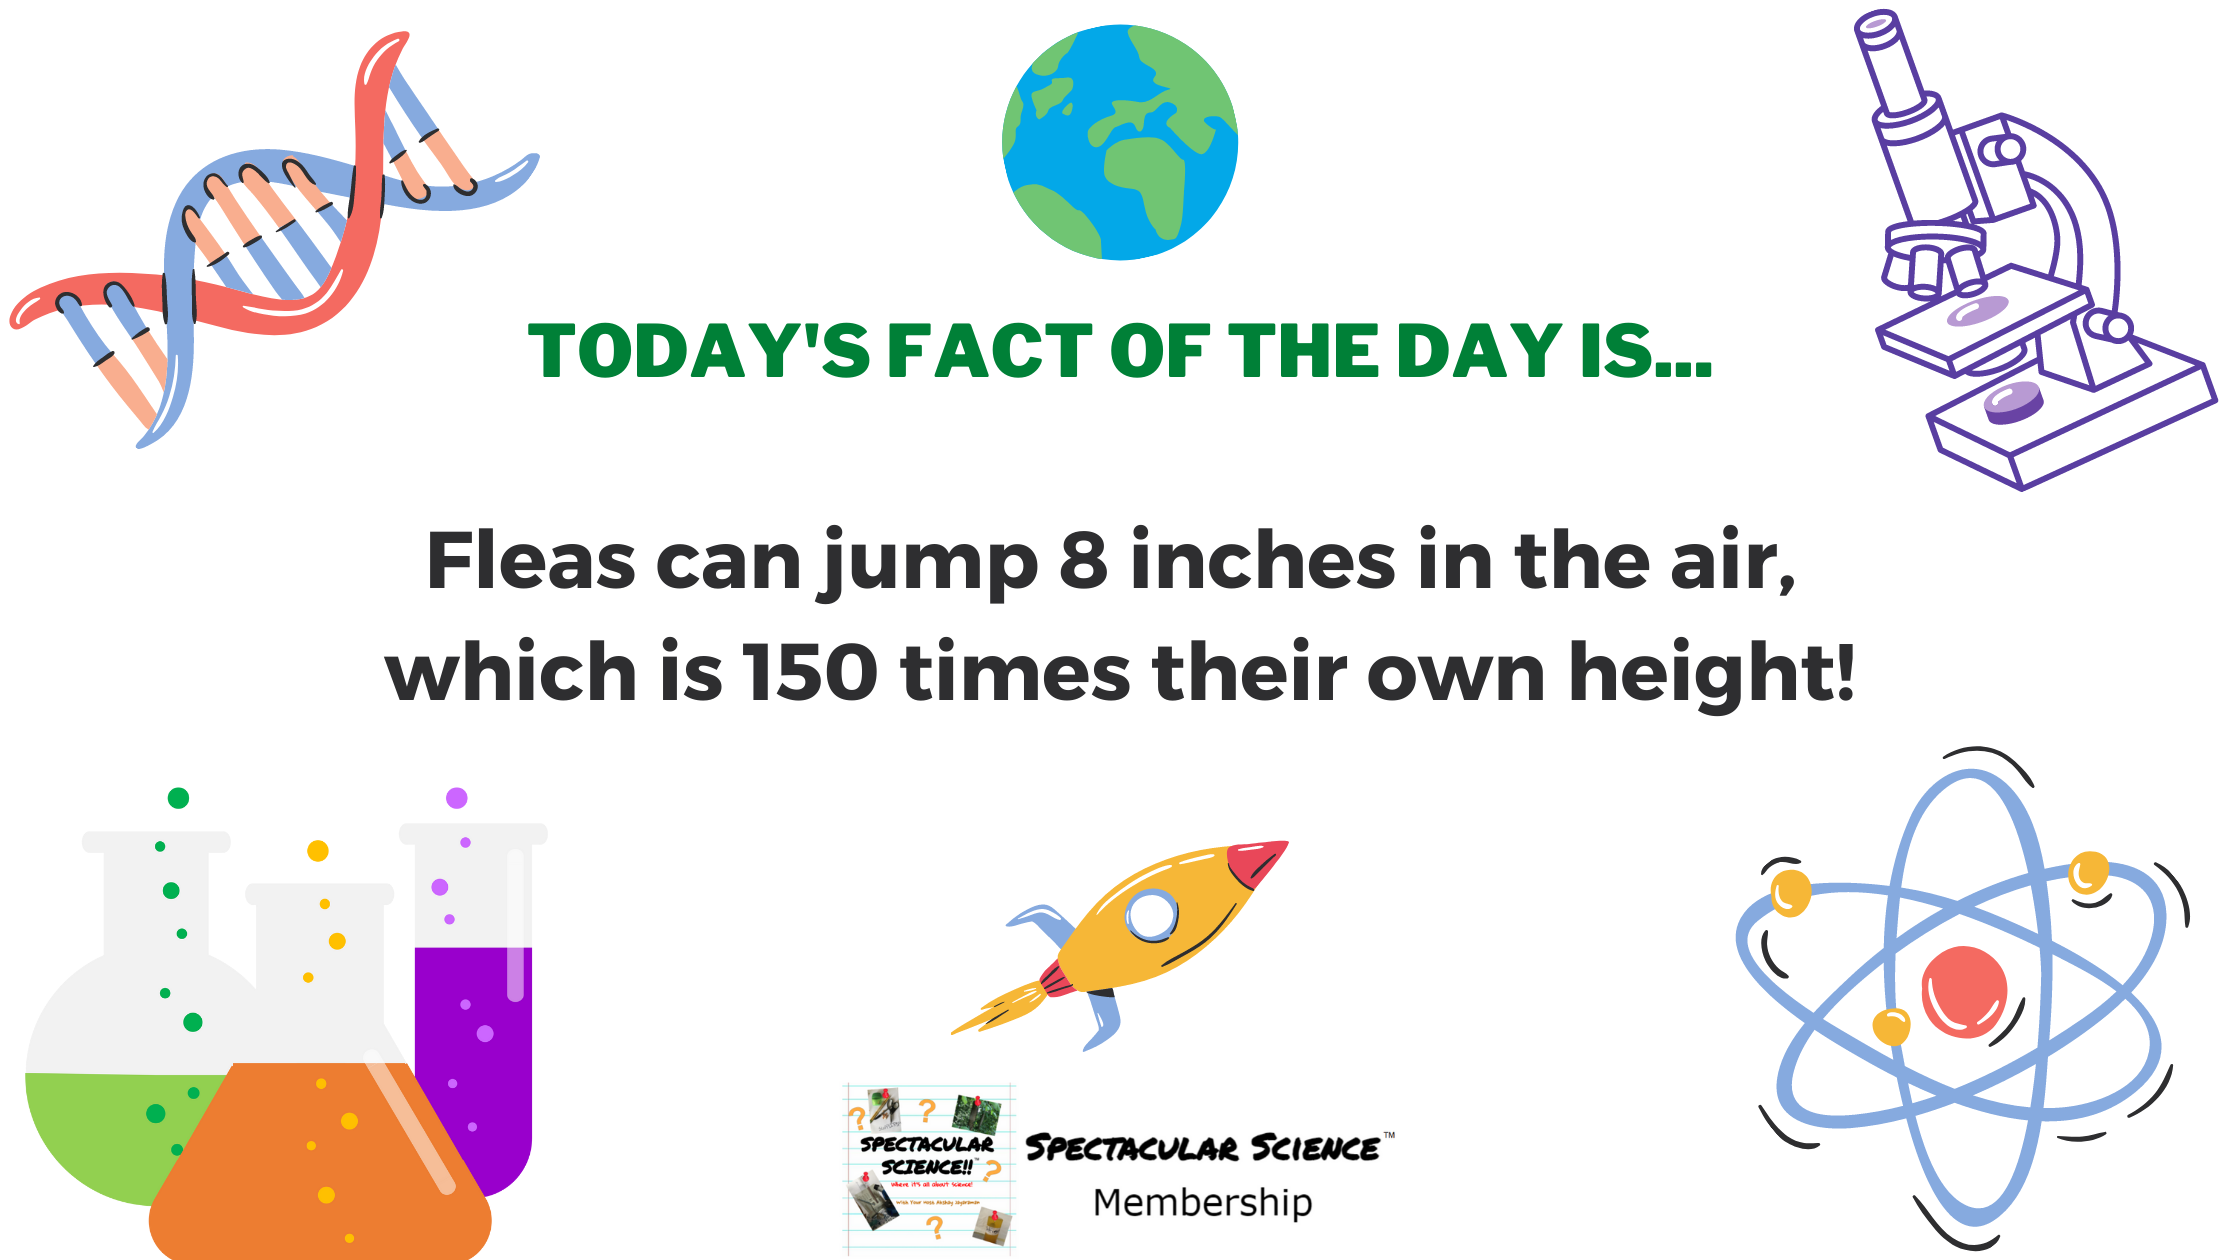 Fact of the Day Image May 7th